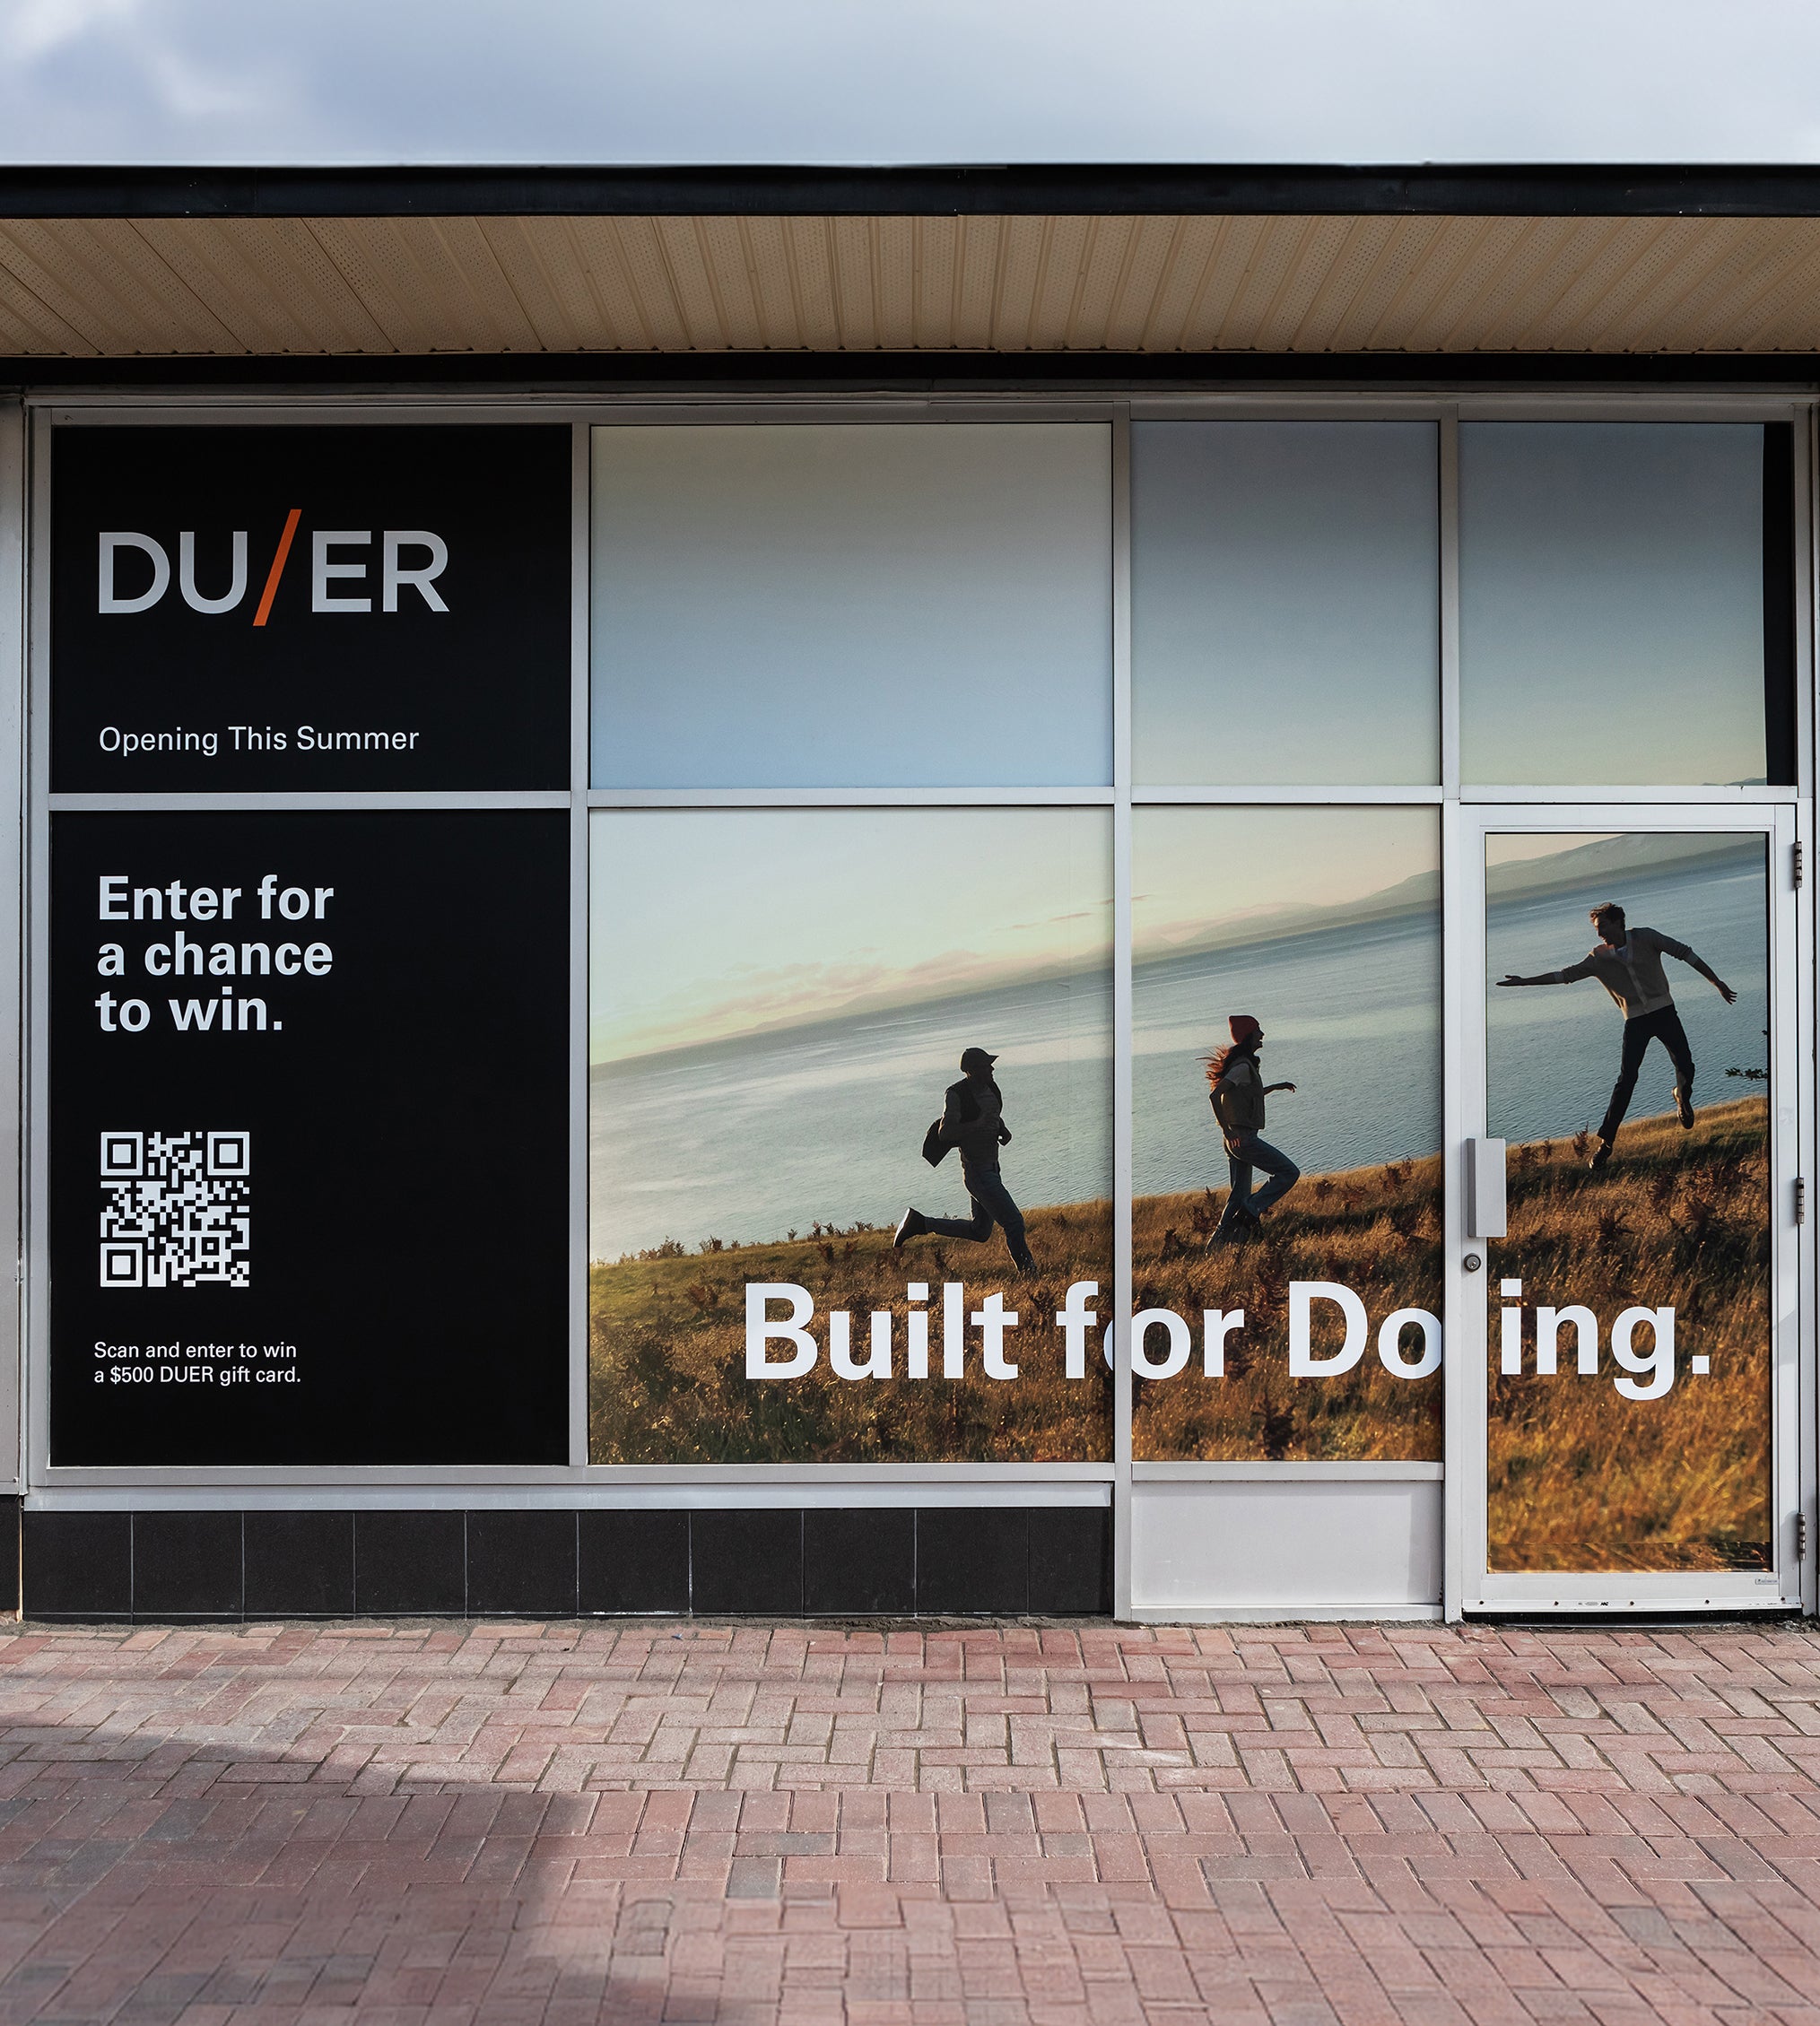 DUER storefront with large windows displaying an ad of people running on a hill by the water. Text reads 'Built for Doing.' QR code and 'Enter for a chance to win.' are also visible, along with 'Opening This Summer'.